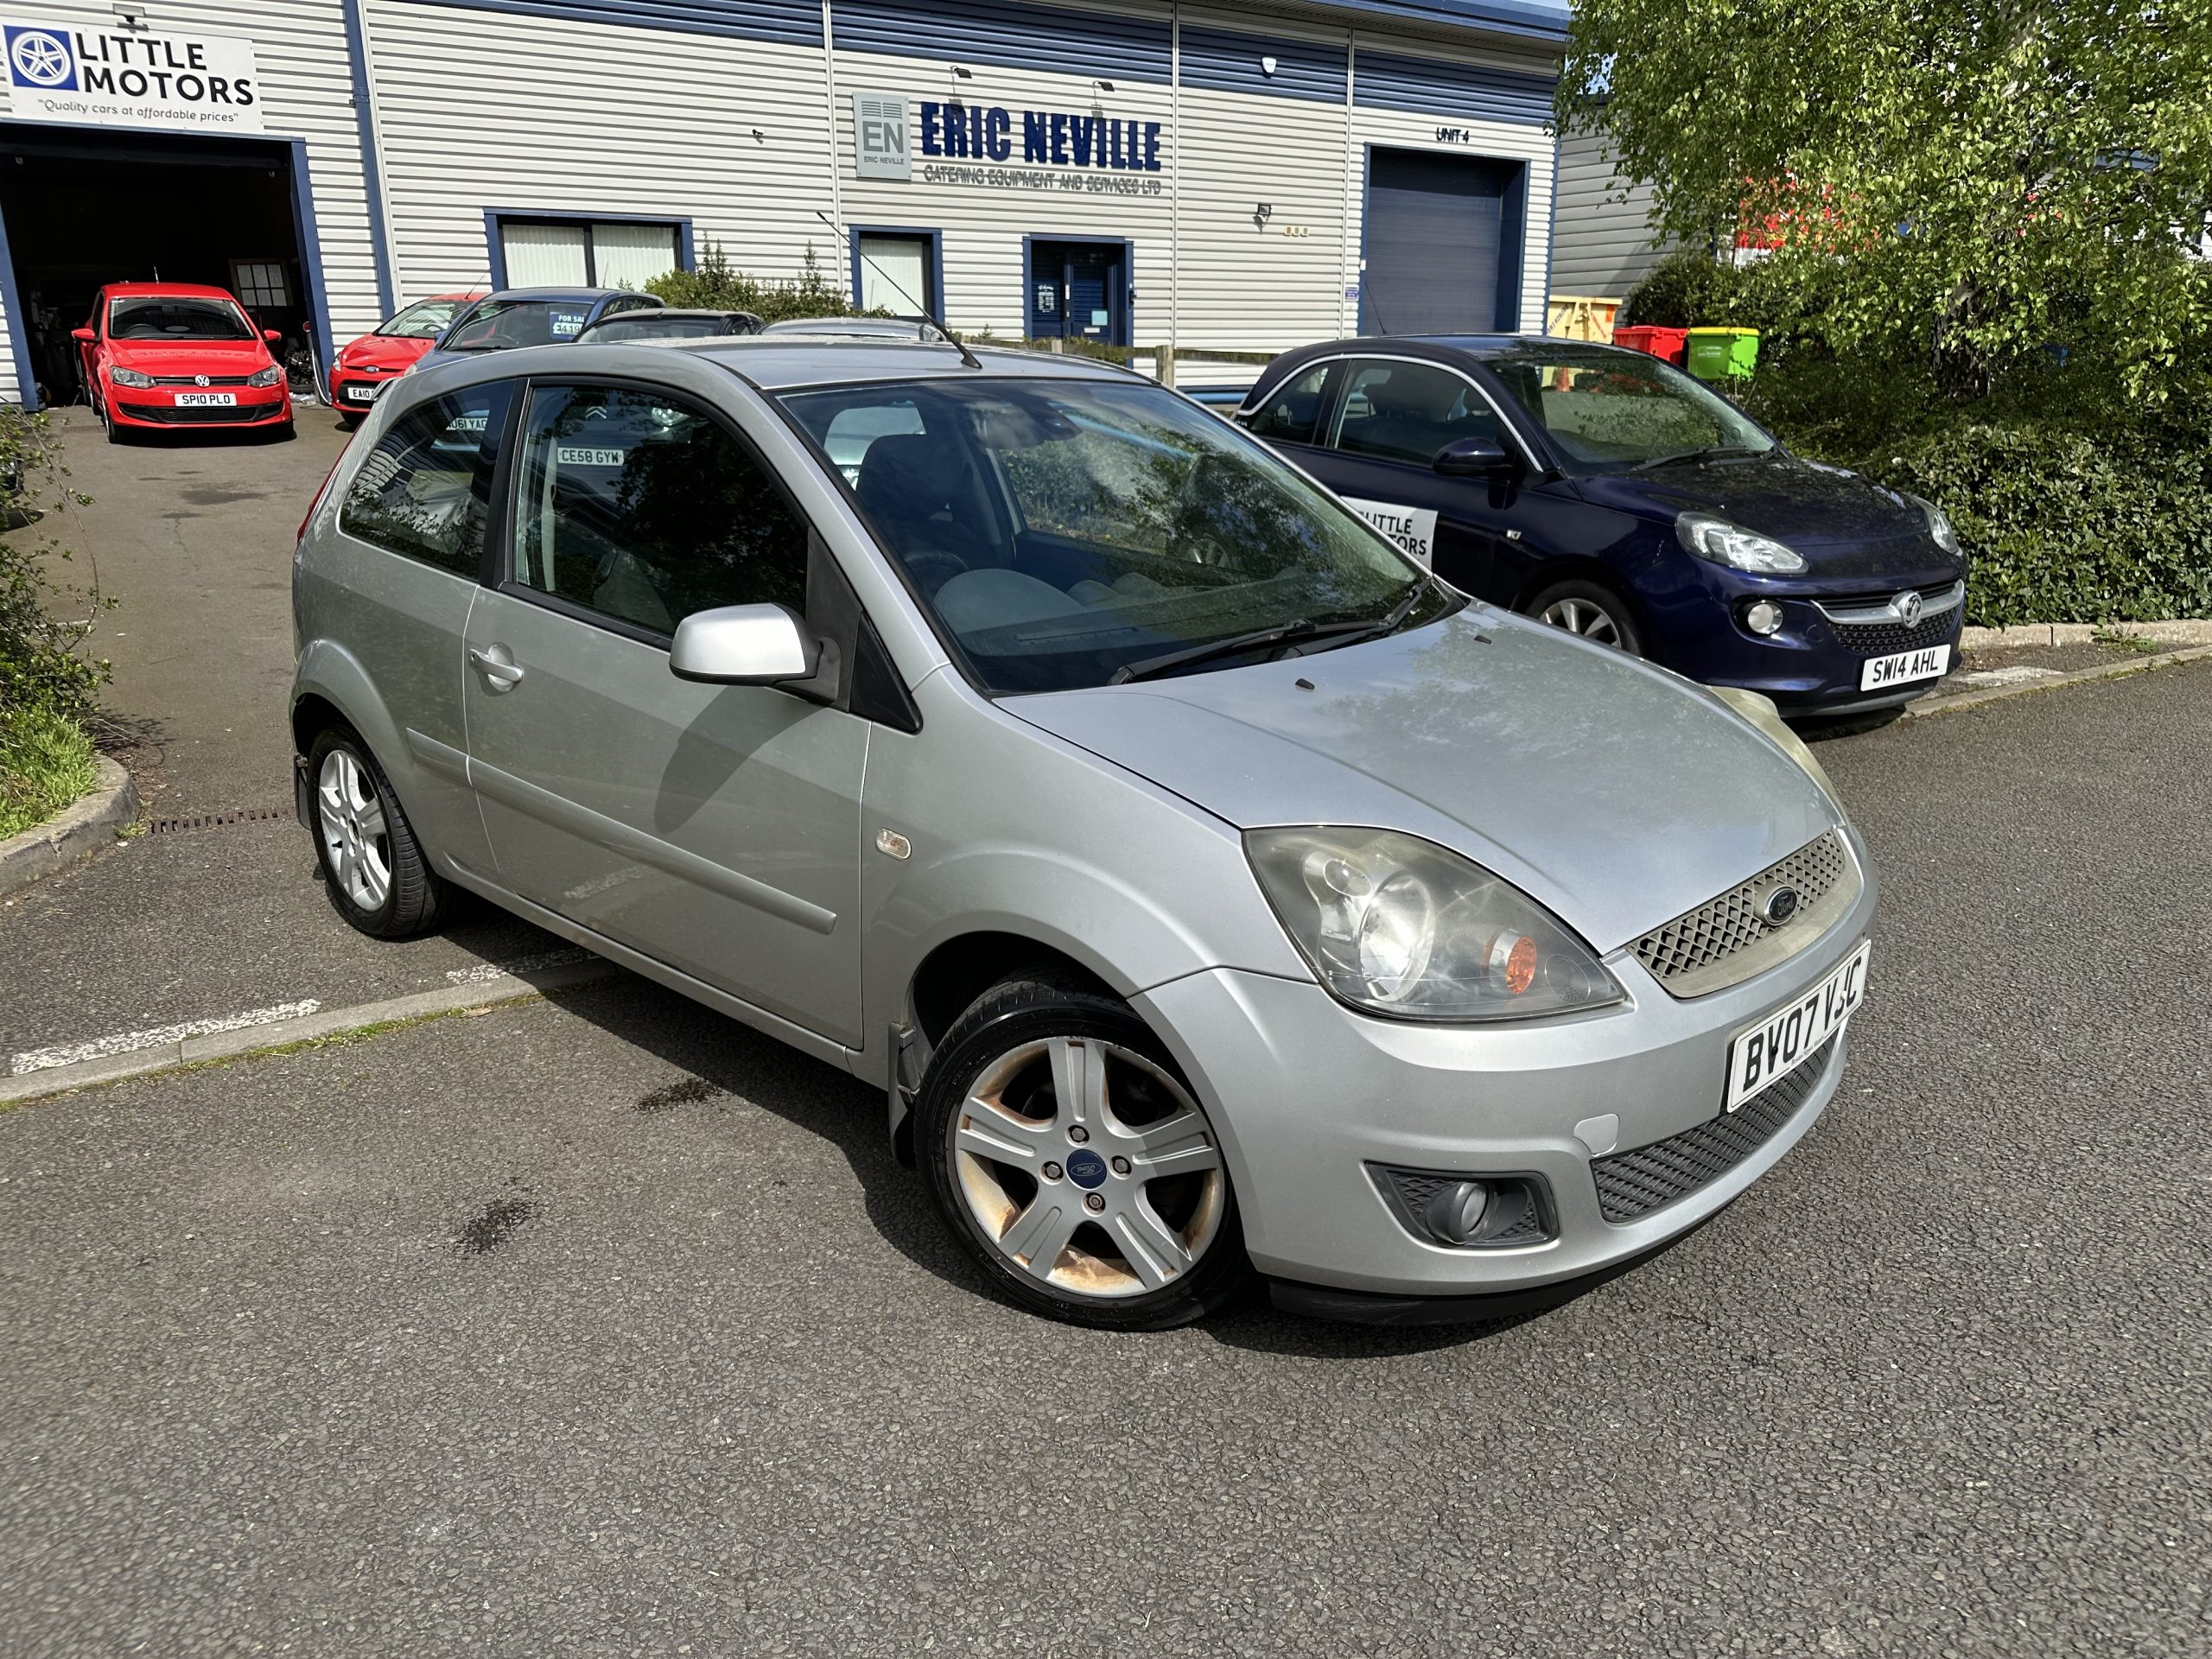 Ford Fiesta 1.25 Zetec Climate 3dr 2007